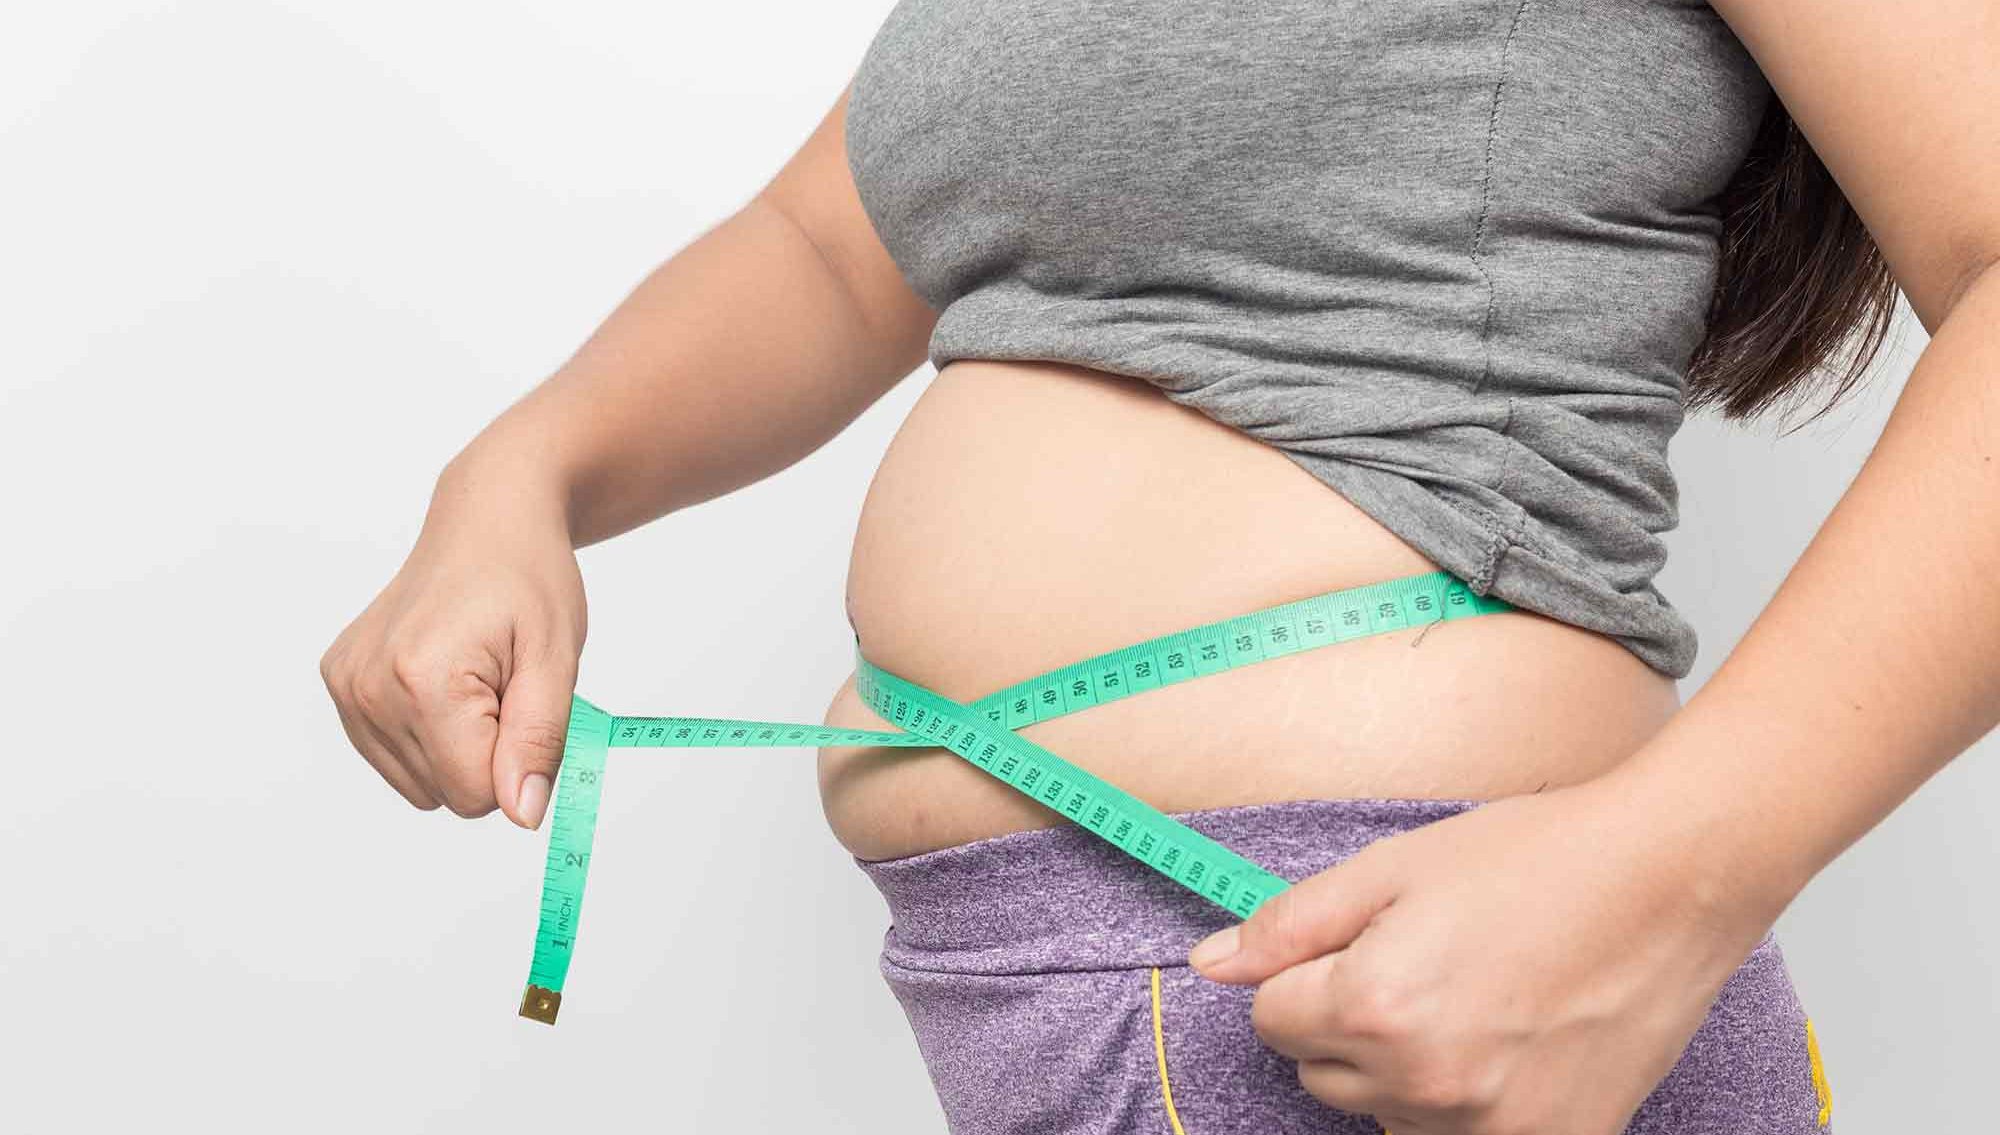 Overweight or obese individuals made up 78% of confirmed COVID-19 cases – Dentistry Online